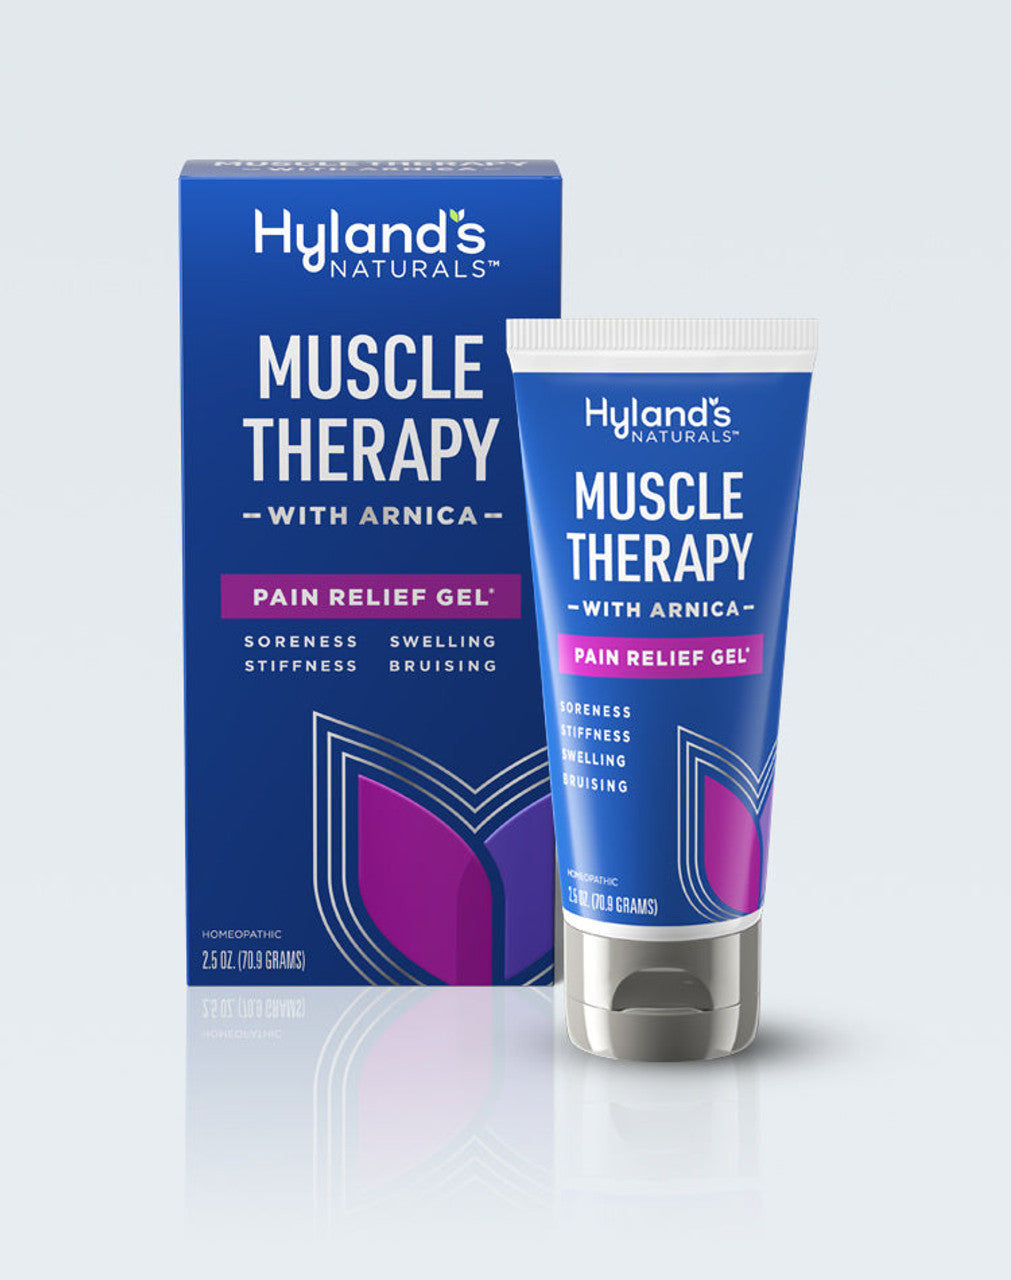 Hylands Muscle Therapy Gel with Arnica, 2.5 Oz